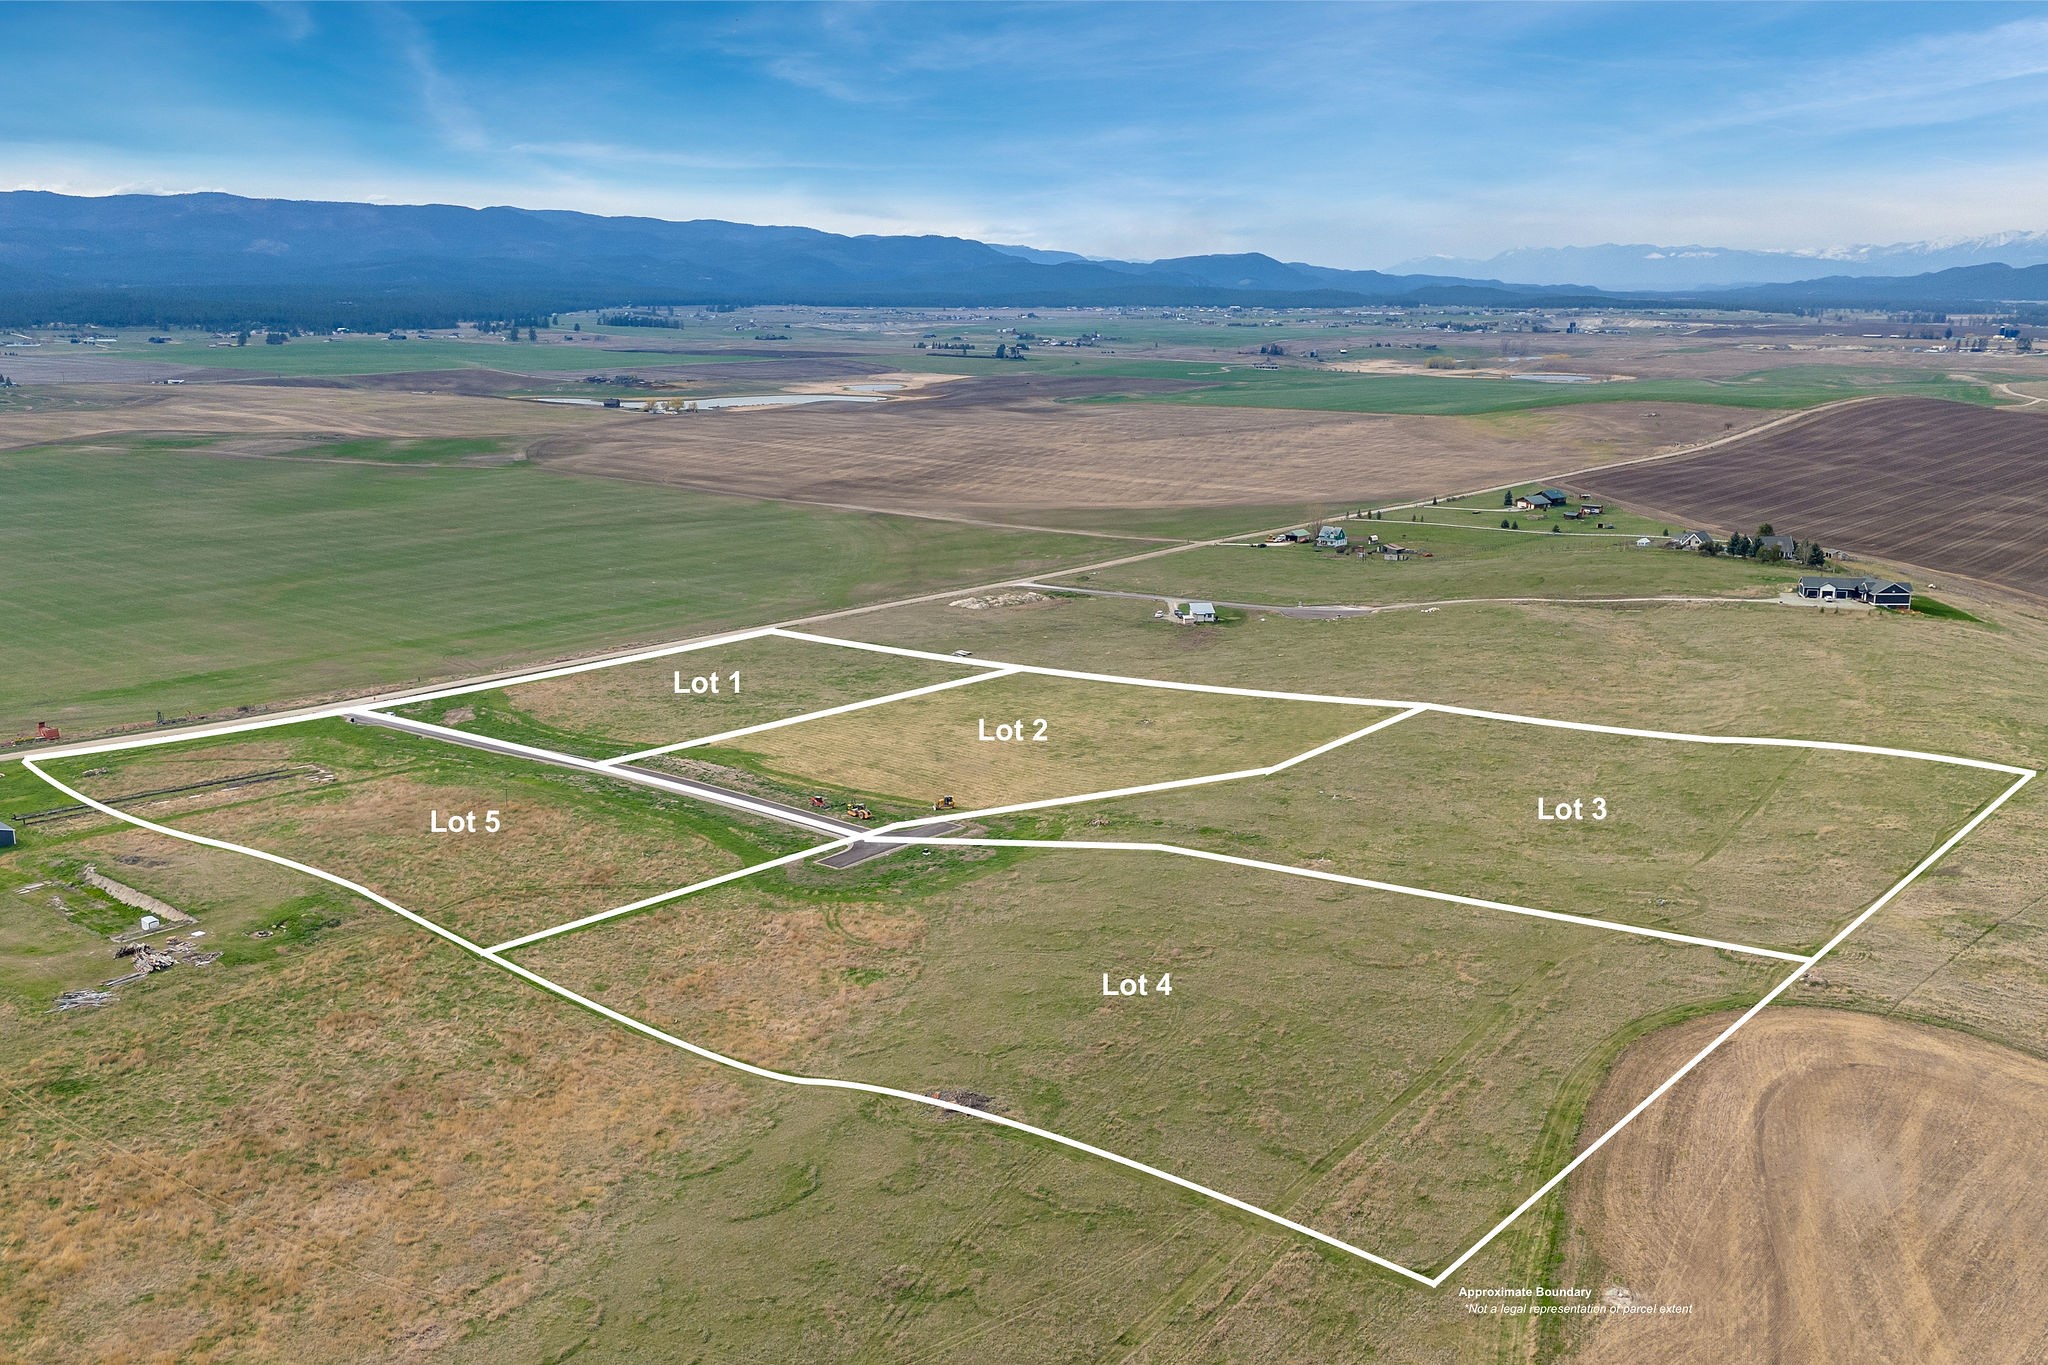 Here is the Flathead Valley homesite you have been waiting for!!! With a premium West Valley location, this 5-acre site is a rare find. Showcasing wide open mountain and valley views, it is DEQ approved for both a primary home and guest house/ADU. Located minutes from Rebecca Farm, the by-pass, and all the amenities Kalispell and the valley has to offer. Horses and barns are welcome, come enjoy country living at its finest. Build your dream home or homes in the highly sought after and amazing Flathead Valley. Welcome home!!!!